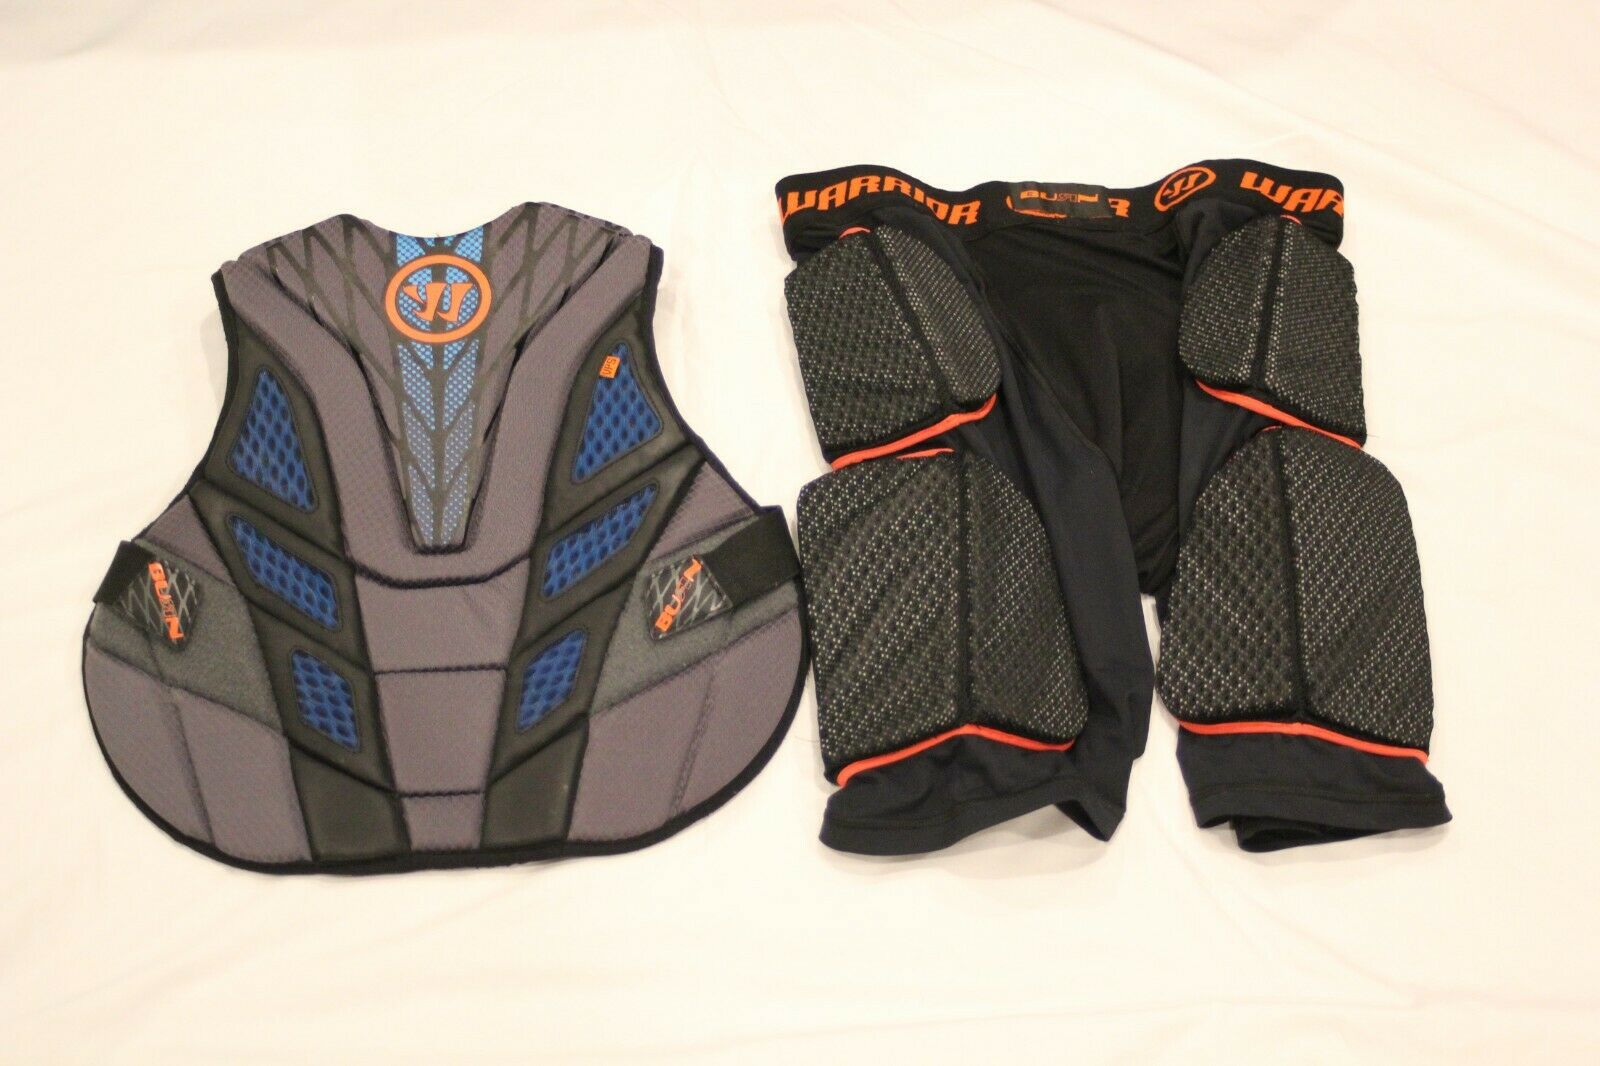 Warrior Lacrosse Burn Goalie Chest Protector & Leg Pads Adult Size Xl- Good Cond